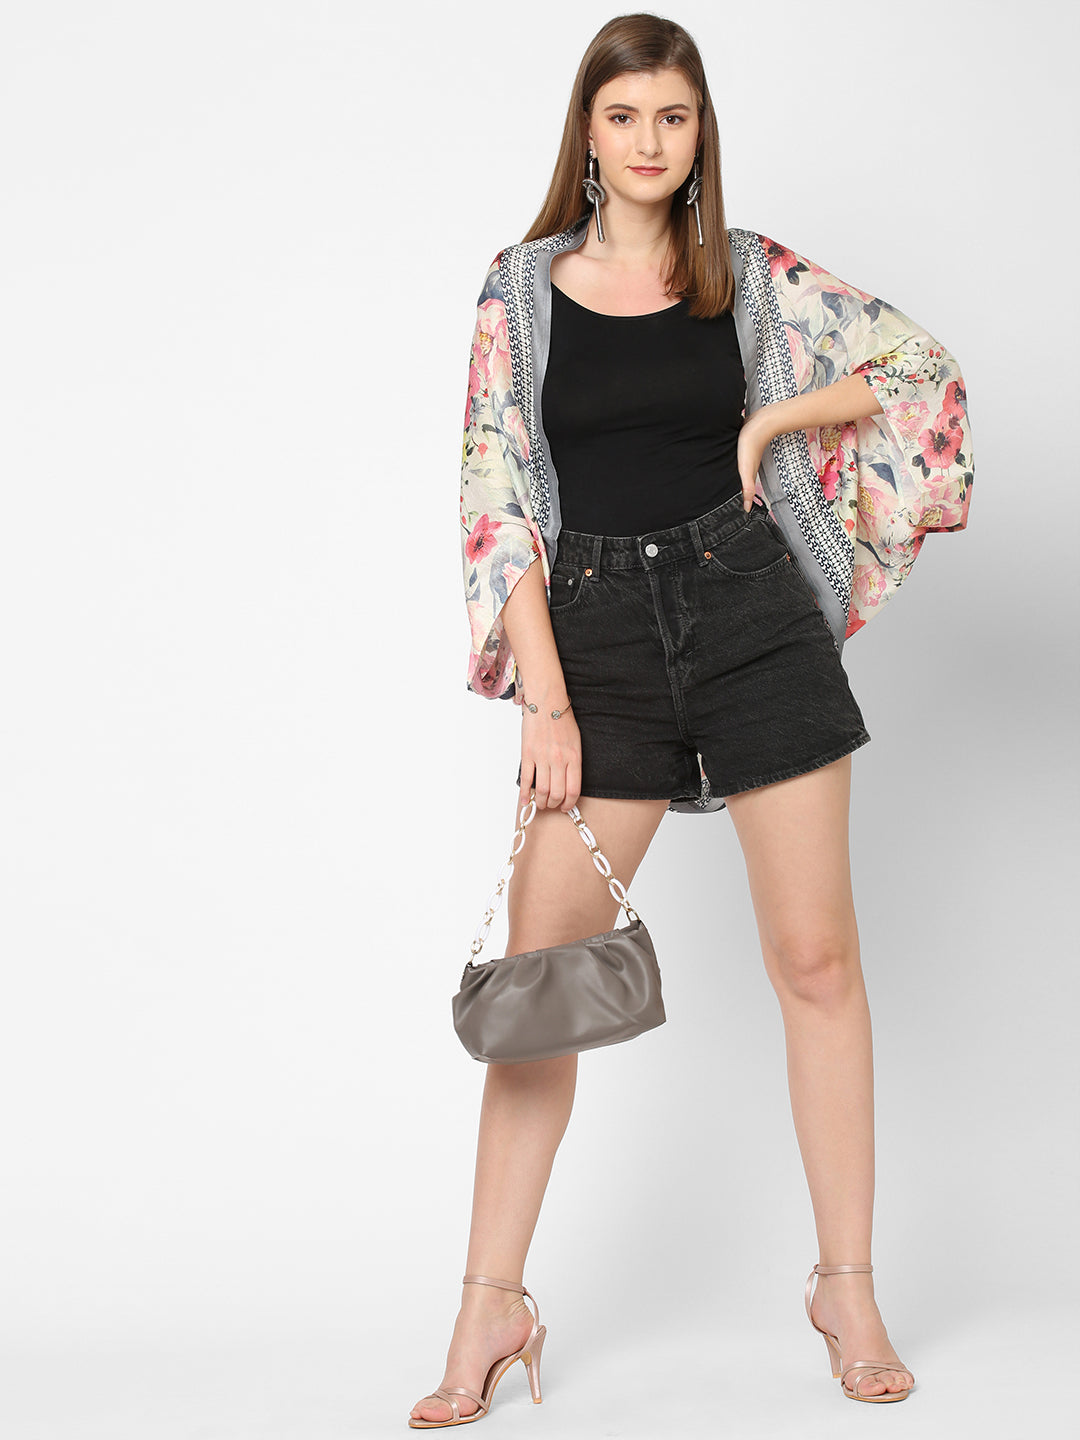 White and Pink Floral Print Cape